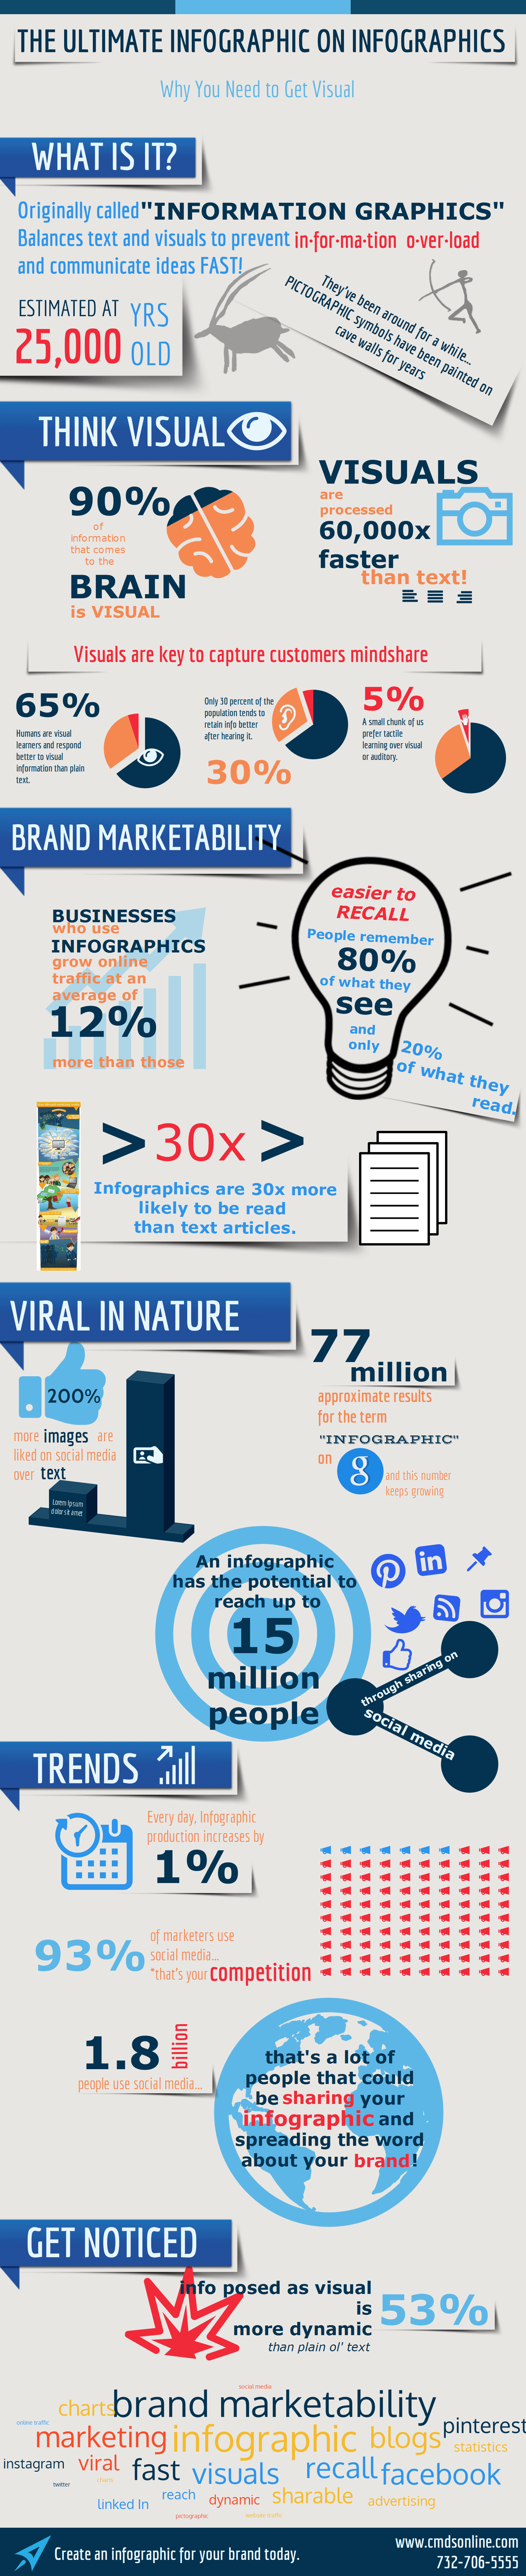 The Ultimate Infographic on Infographics